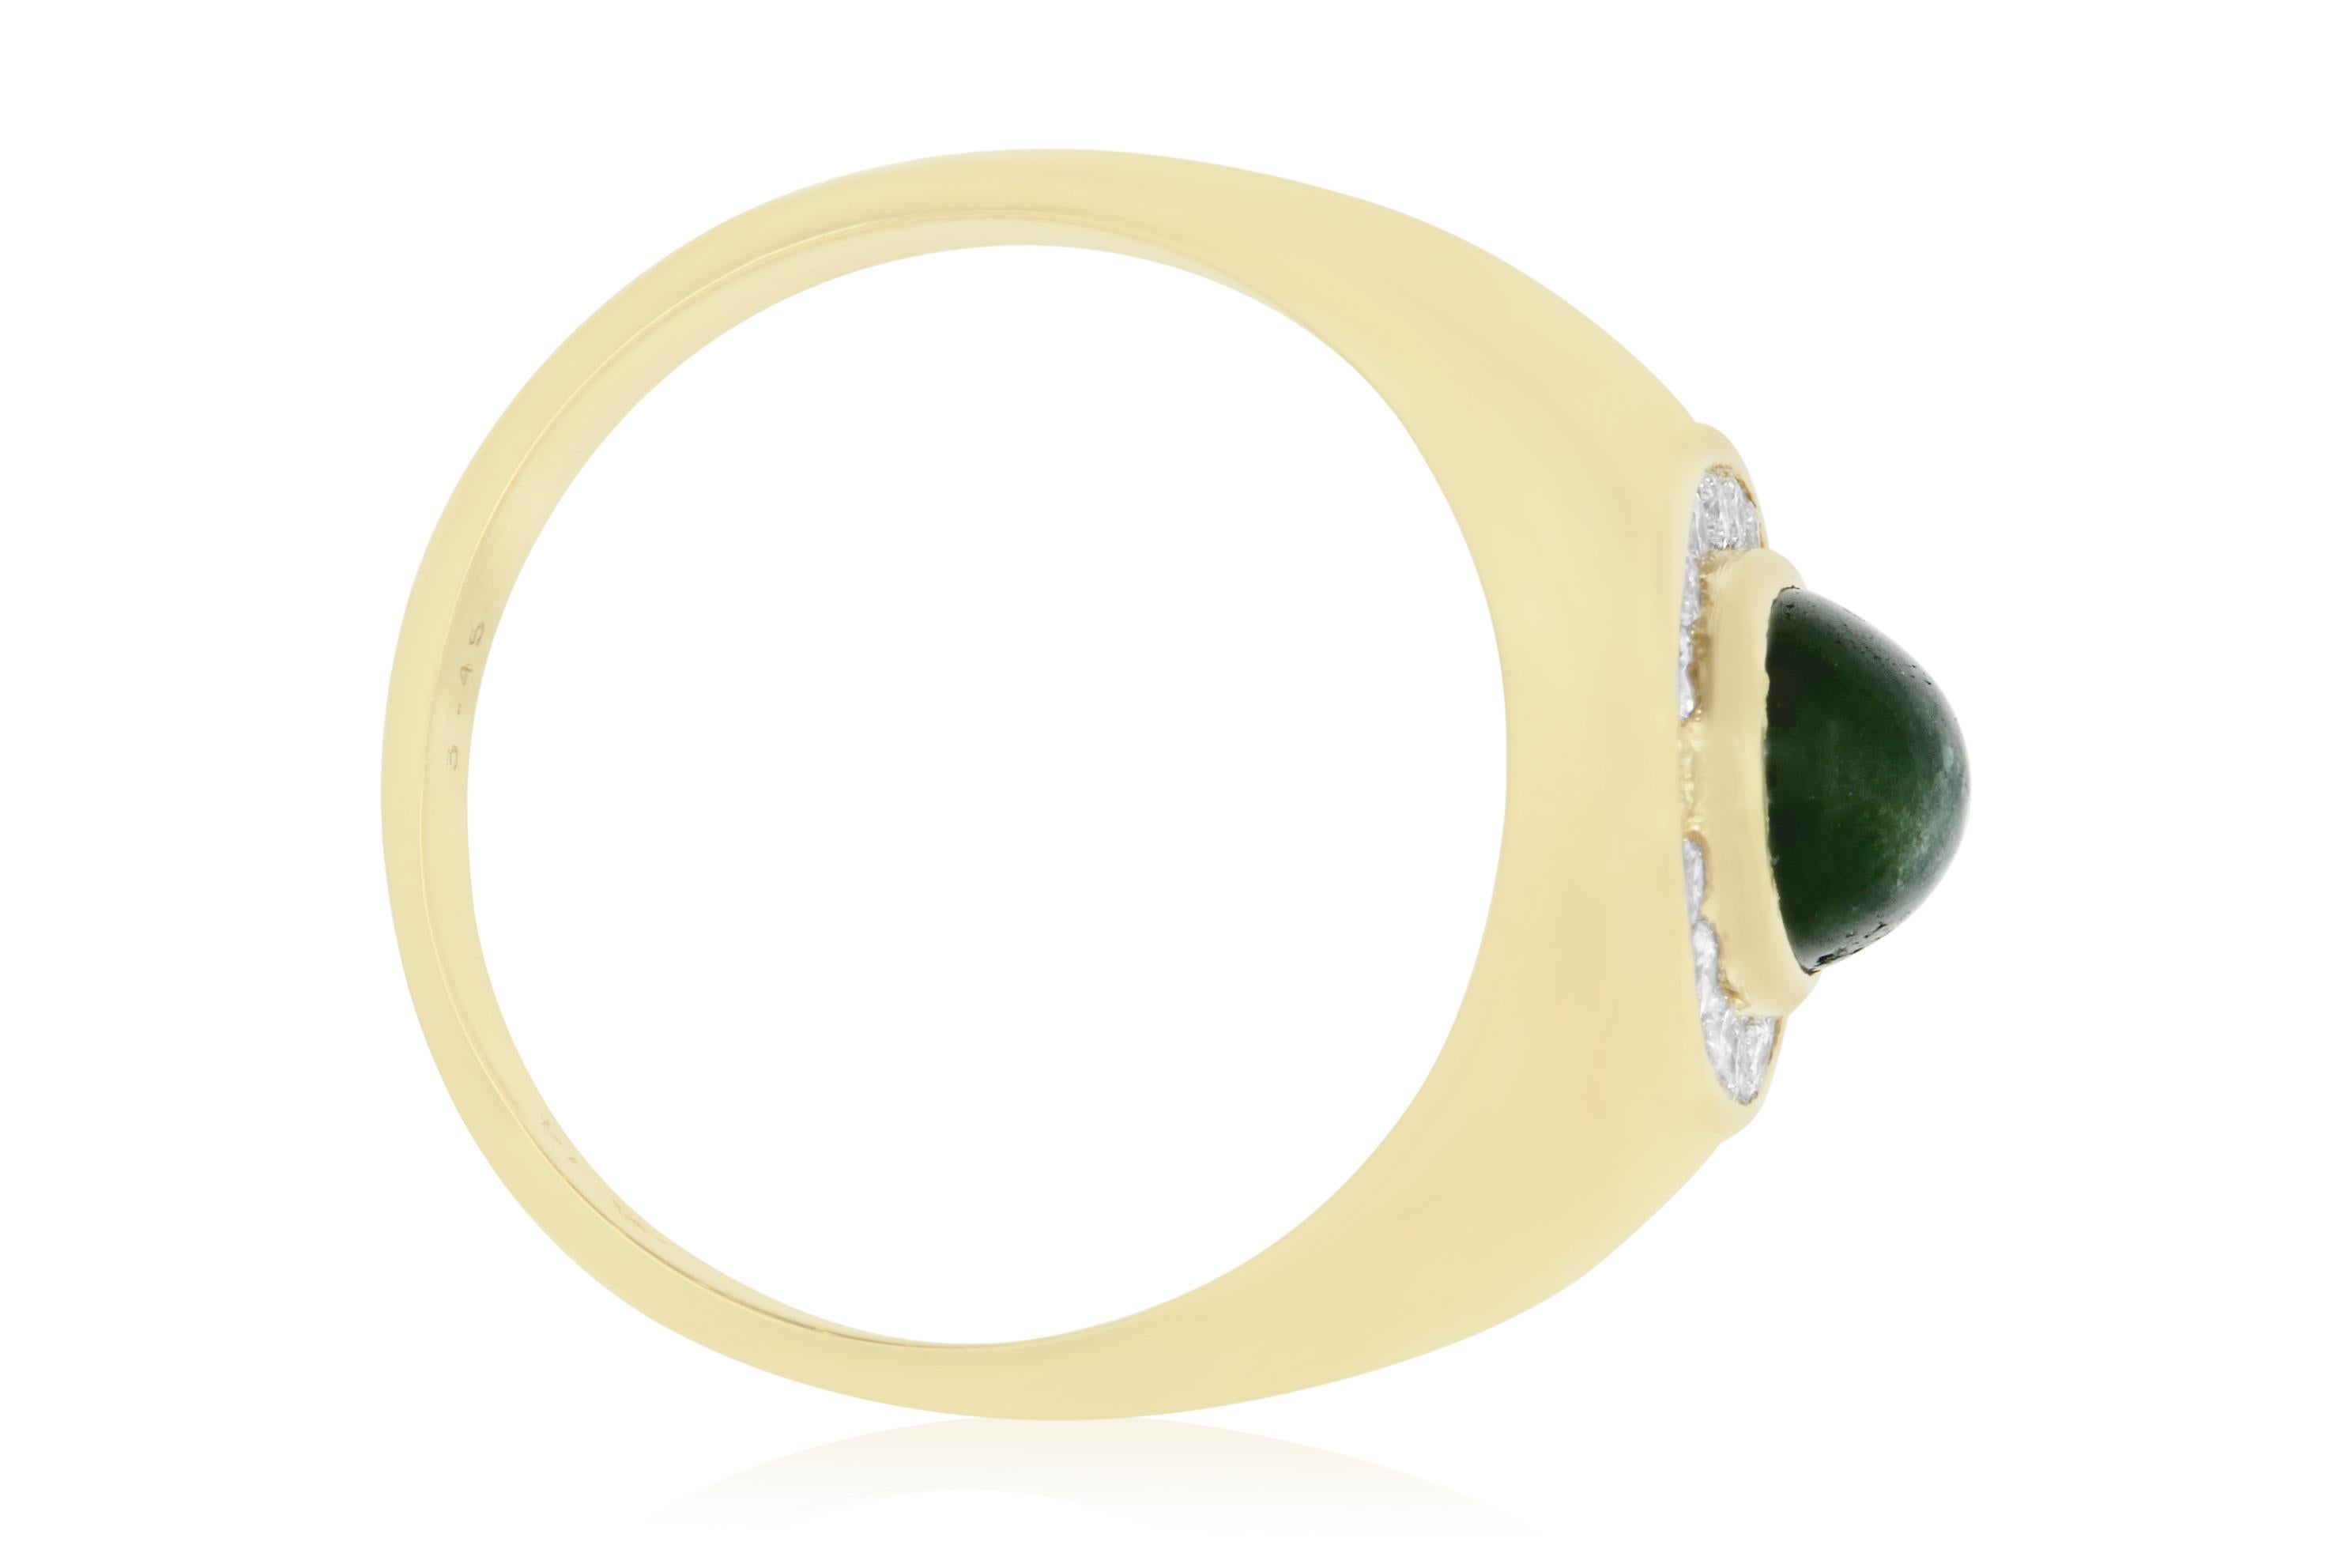 This 14k Yellow Gold setting is a perfect fit for our 3.45 Carat Green Sapphire. Surrounded with a total of 8 brilliant round white diamonds, this classy piece is a must have.    

Material: 14k Yellow Gold
Gemstones: 1 Oval Green Sapphire at 3.45